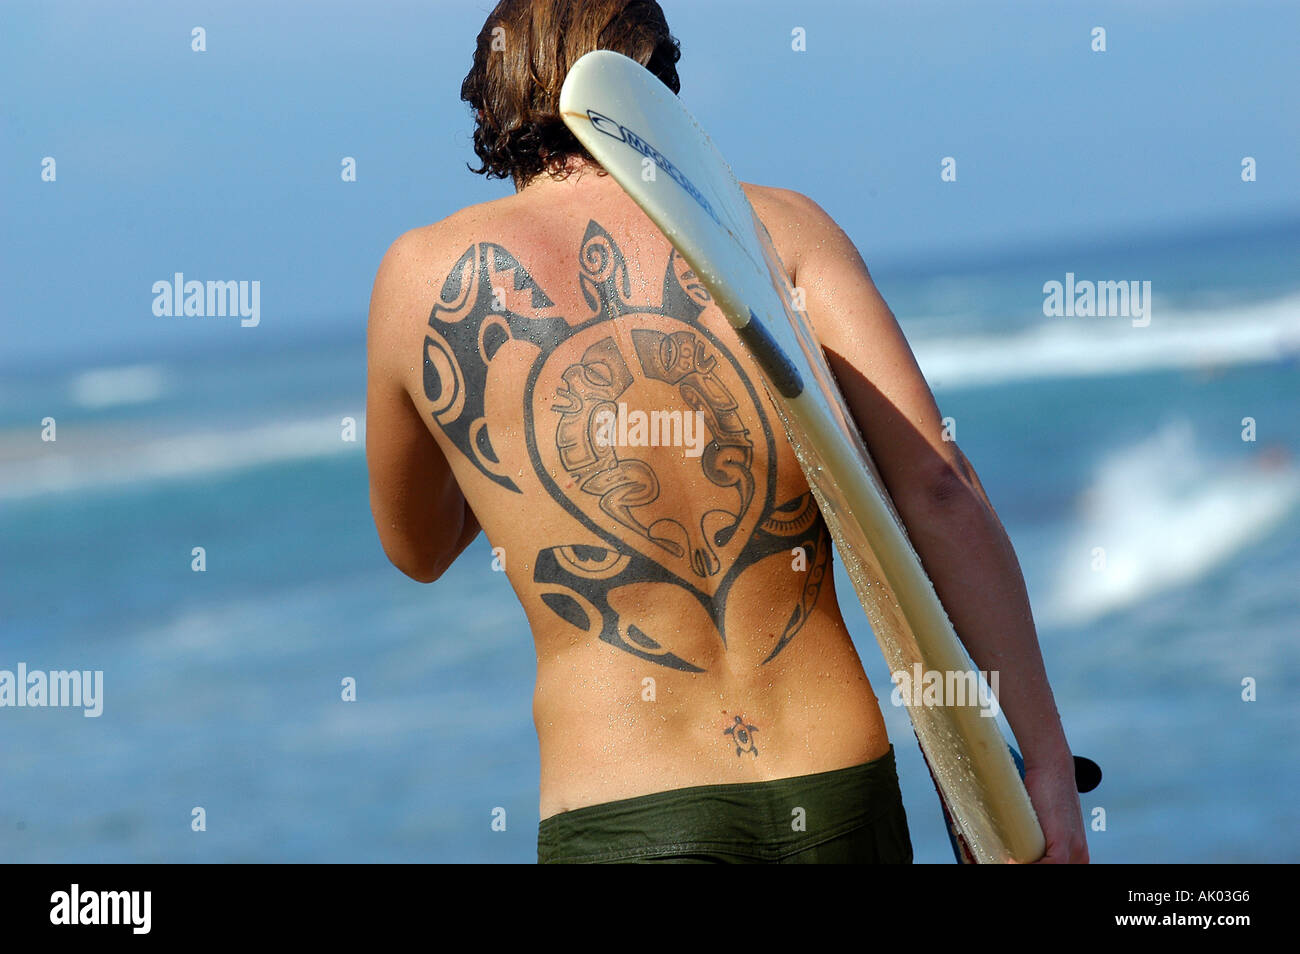 Surfer dude with tattoos  Nathan Rupert  Flickr